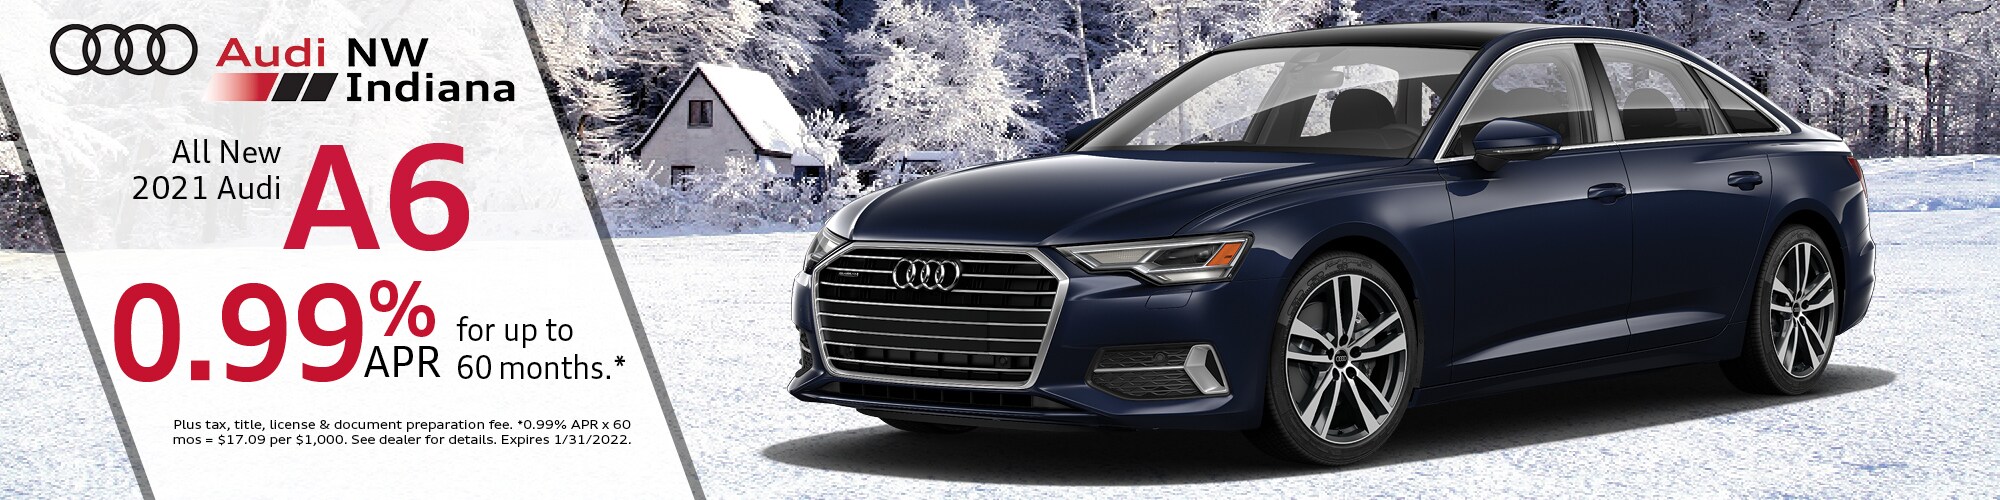 Get the all new 2021 Audi A6 with 0.99% APR for up to 60 months.>
<div class=